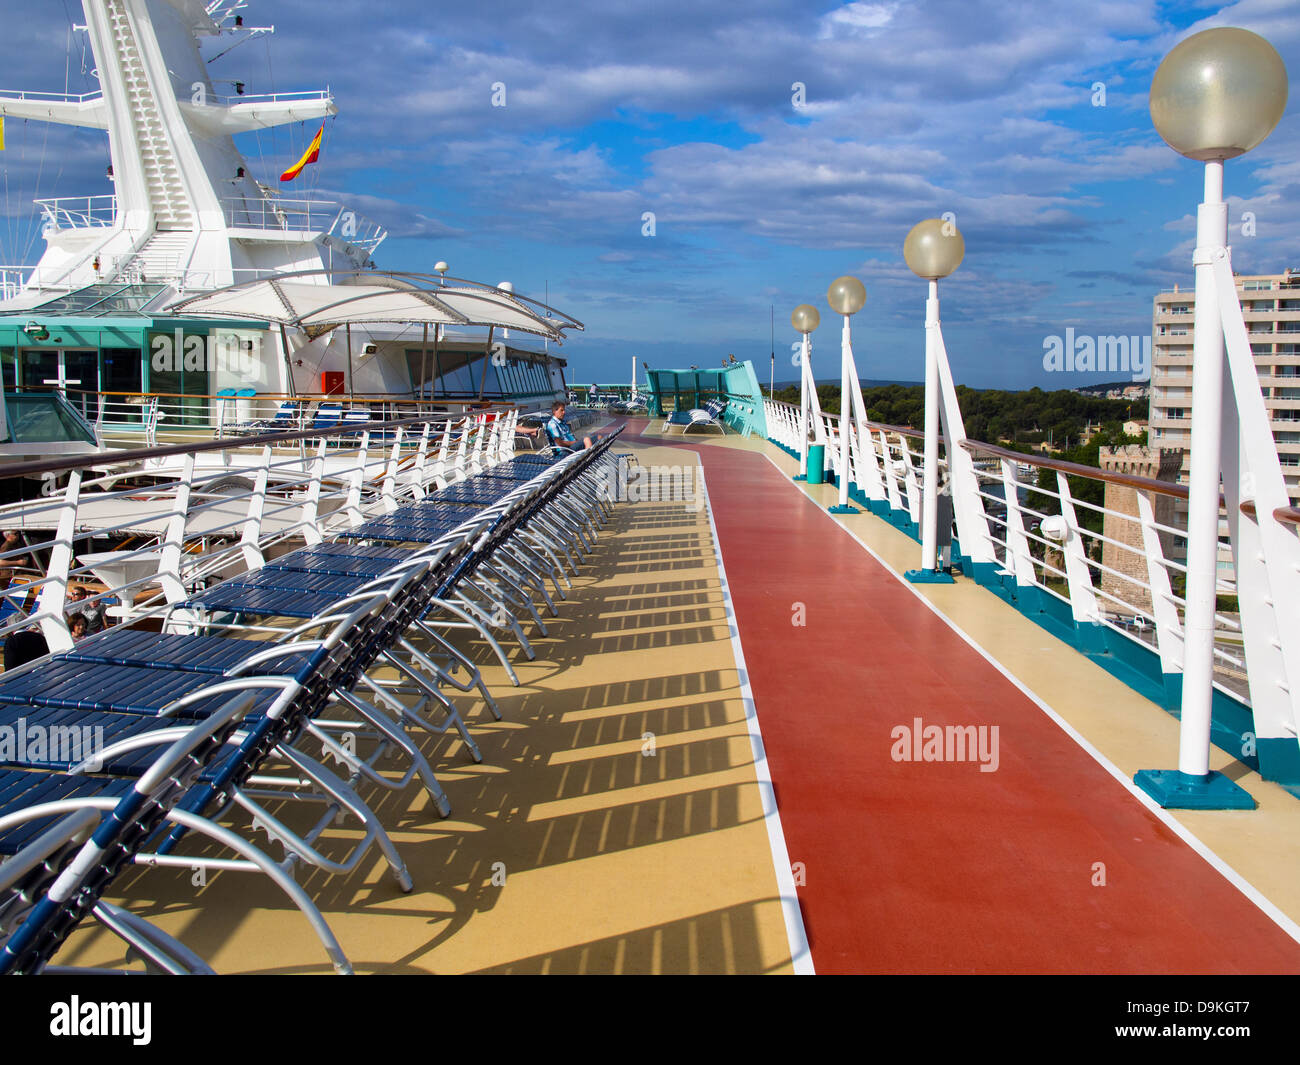 Deck recliners on the cruise liner 'Legend of the Seas' off Palma de Mallorca in the Balearics, Spain 6 Stock Photo